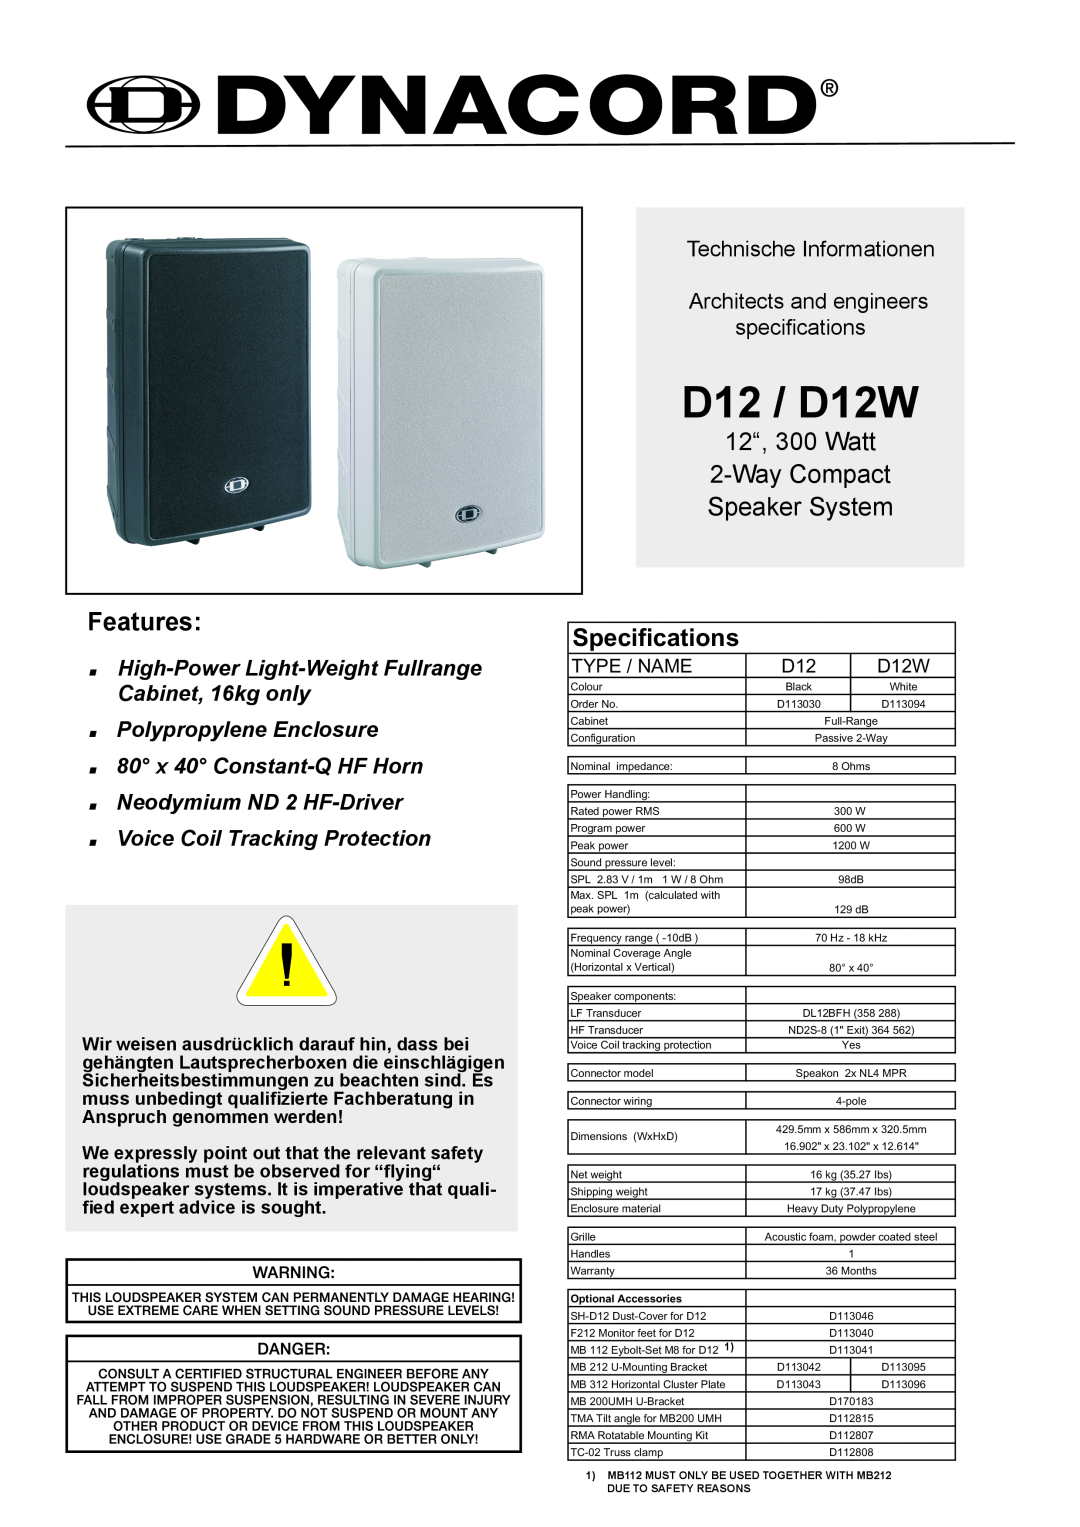 Dynacord specifications D12 / D12W, Features, 12“, 300 Watt 2-WayCompact Speaker System, Specifications, Type / Name 